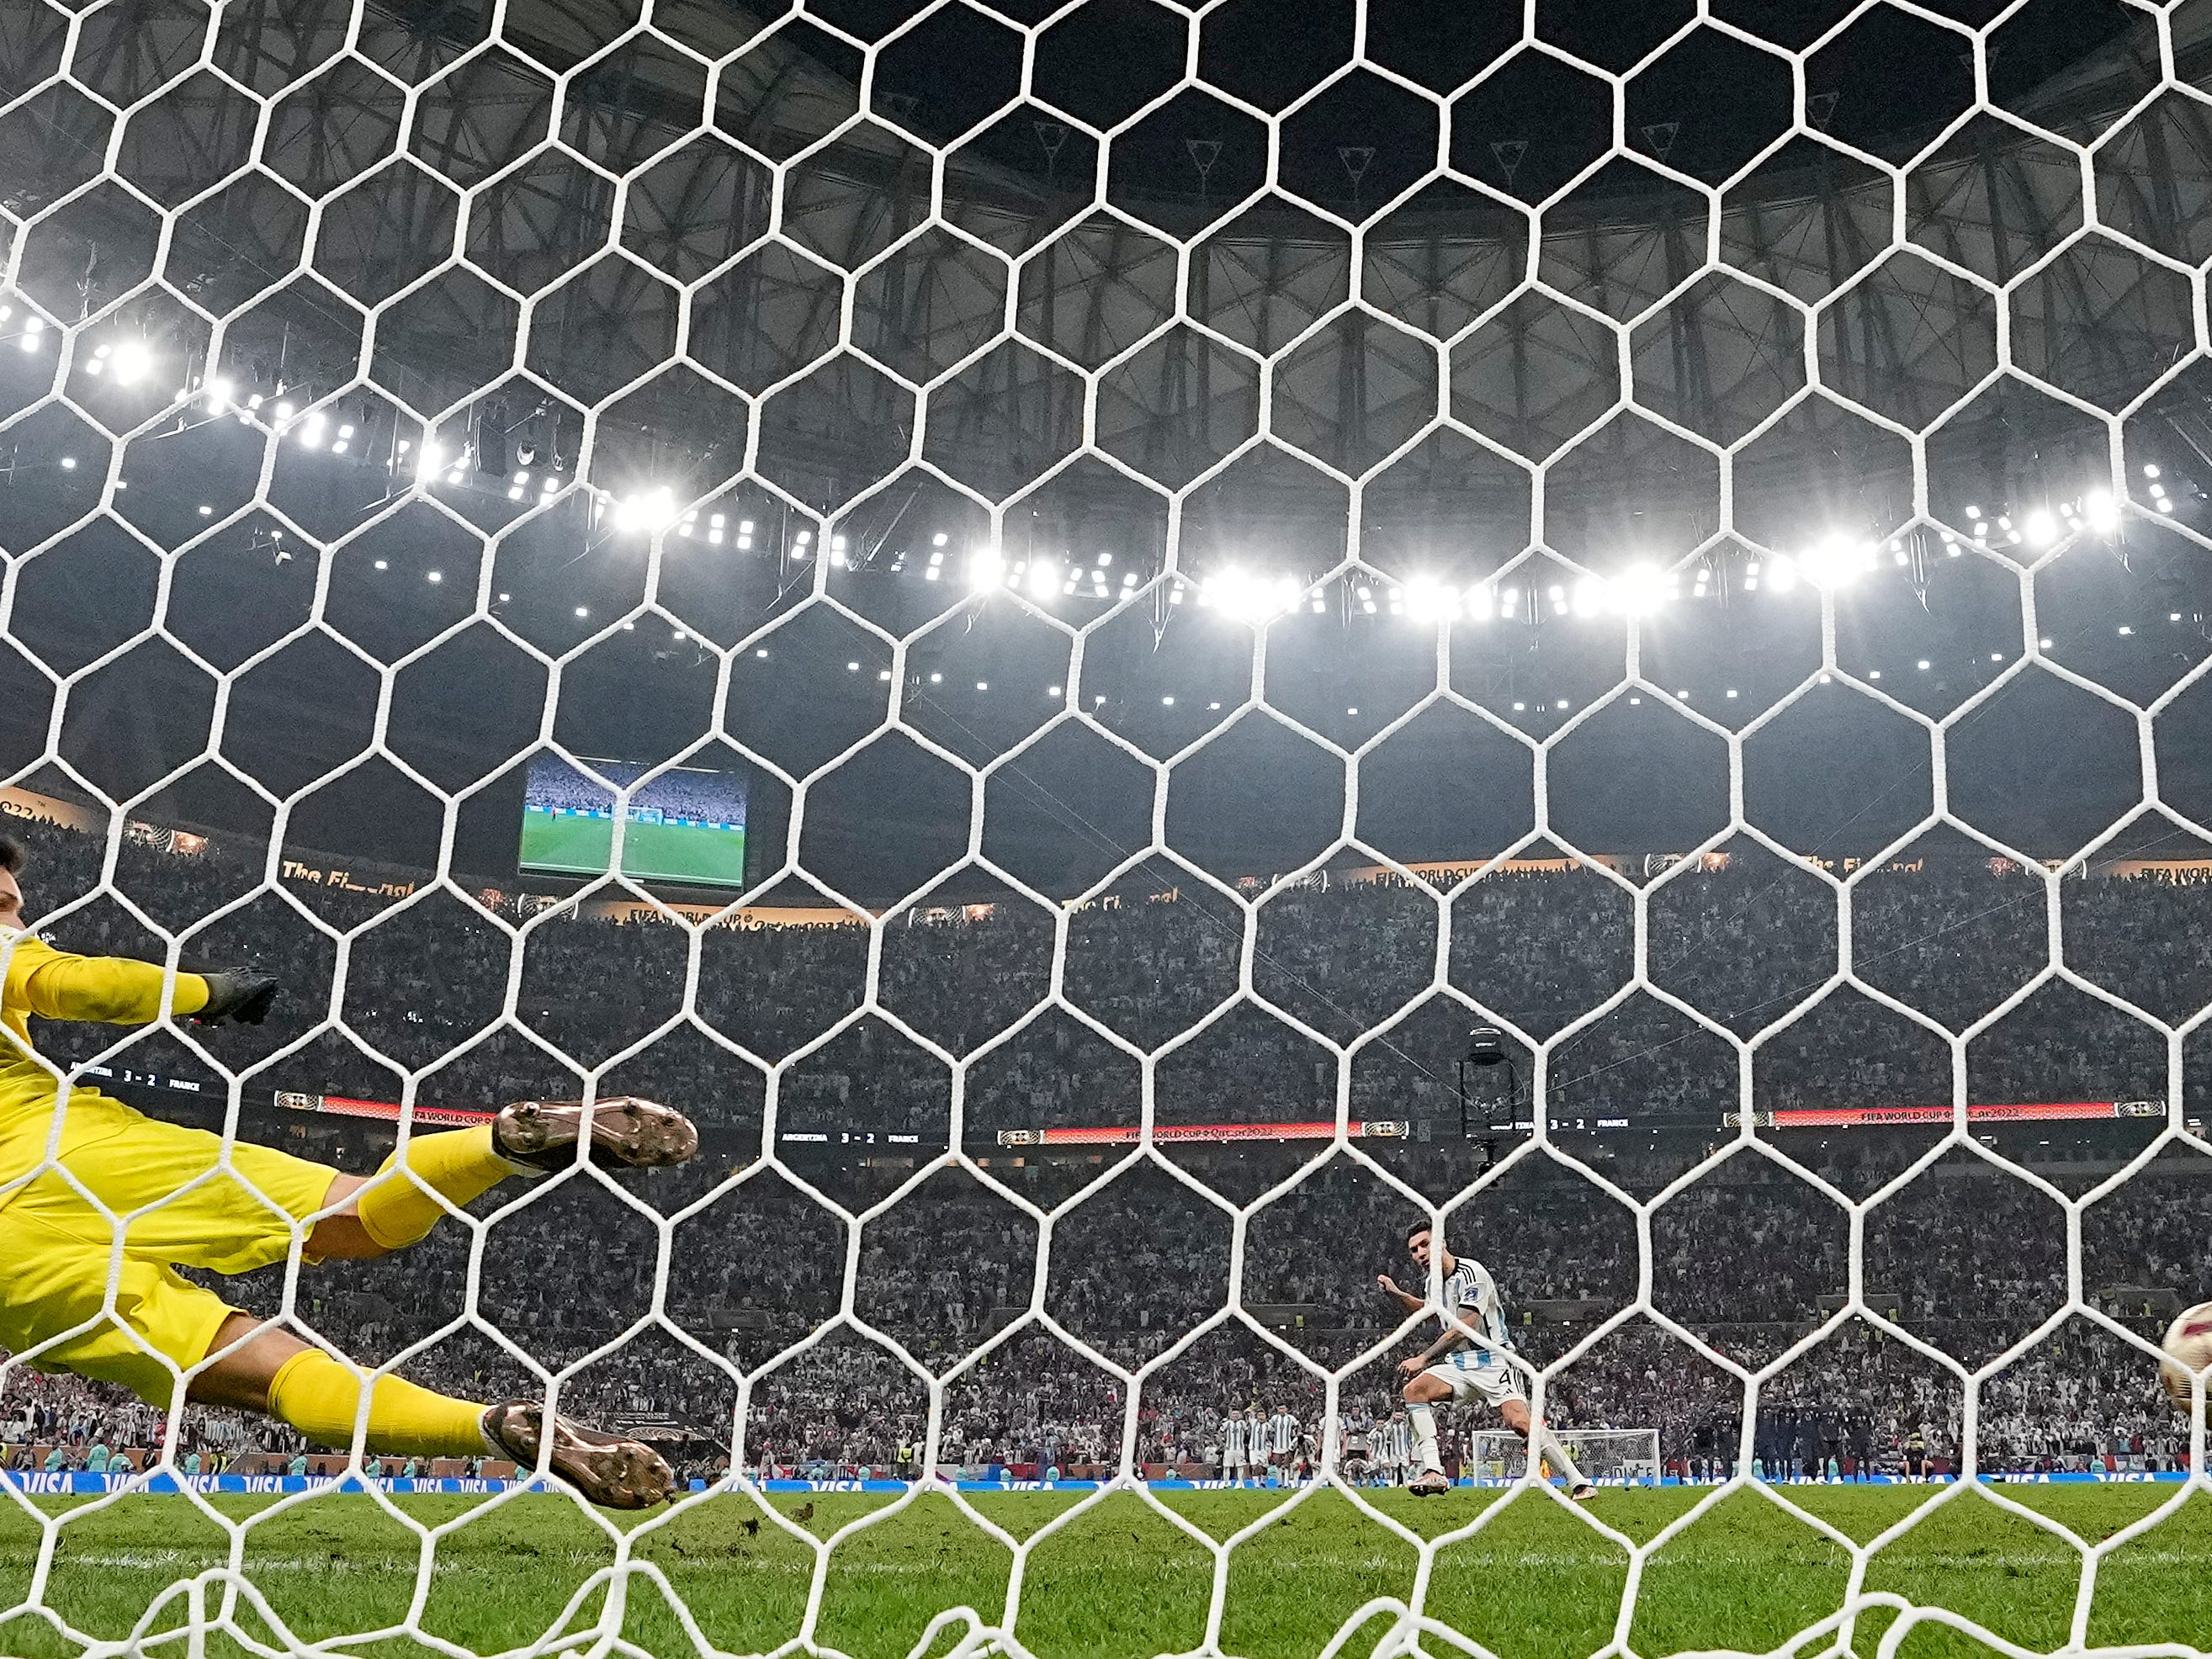 Argentina's Gonzalo Montiel scores the winning penalty past France goalkeeper Hugo Lloris to win a shootout.